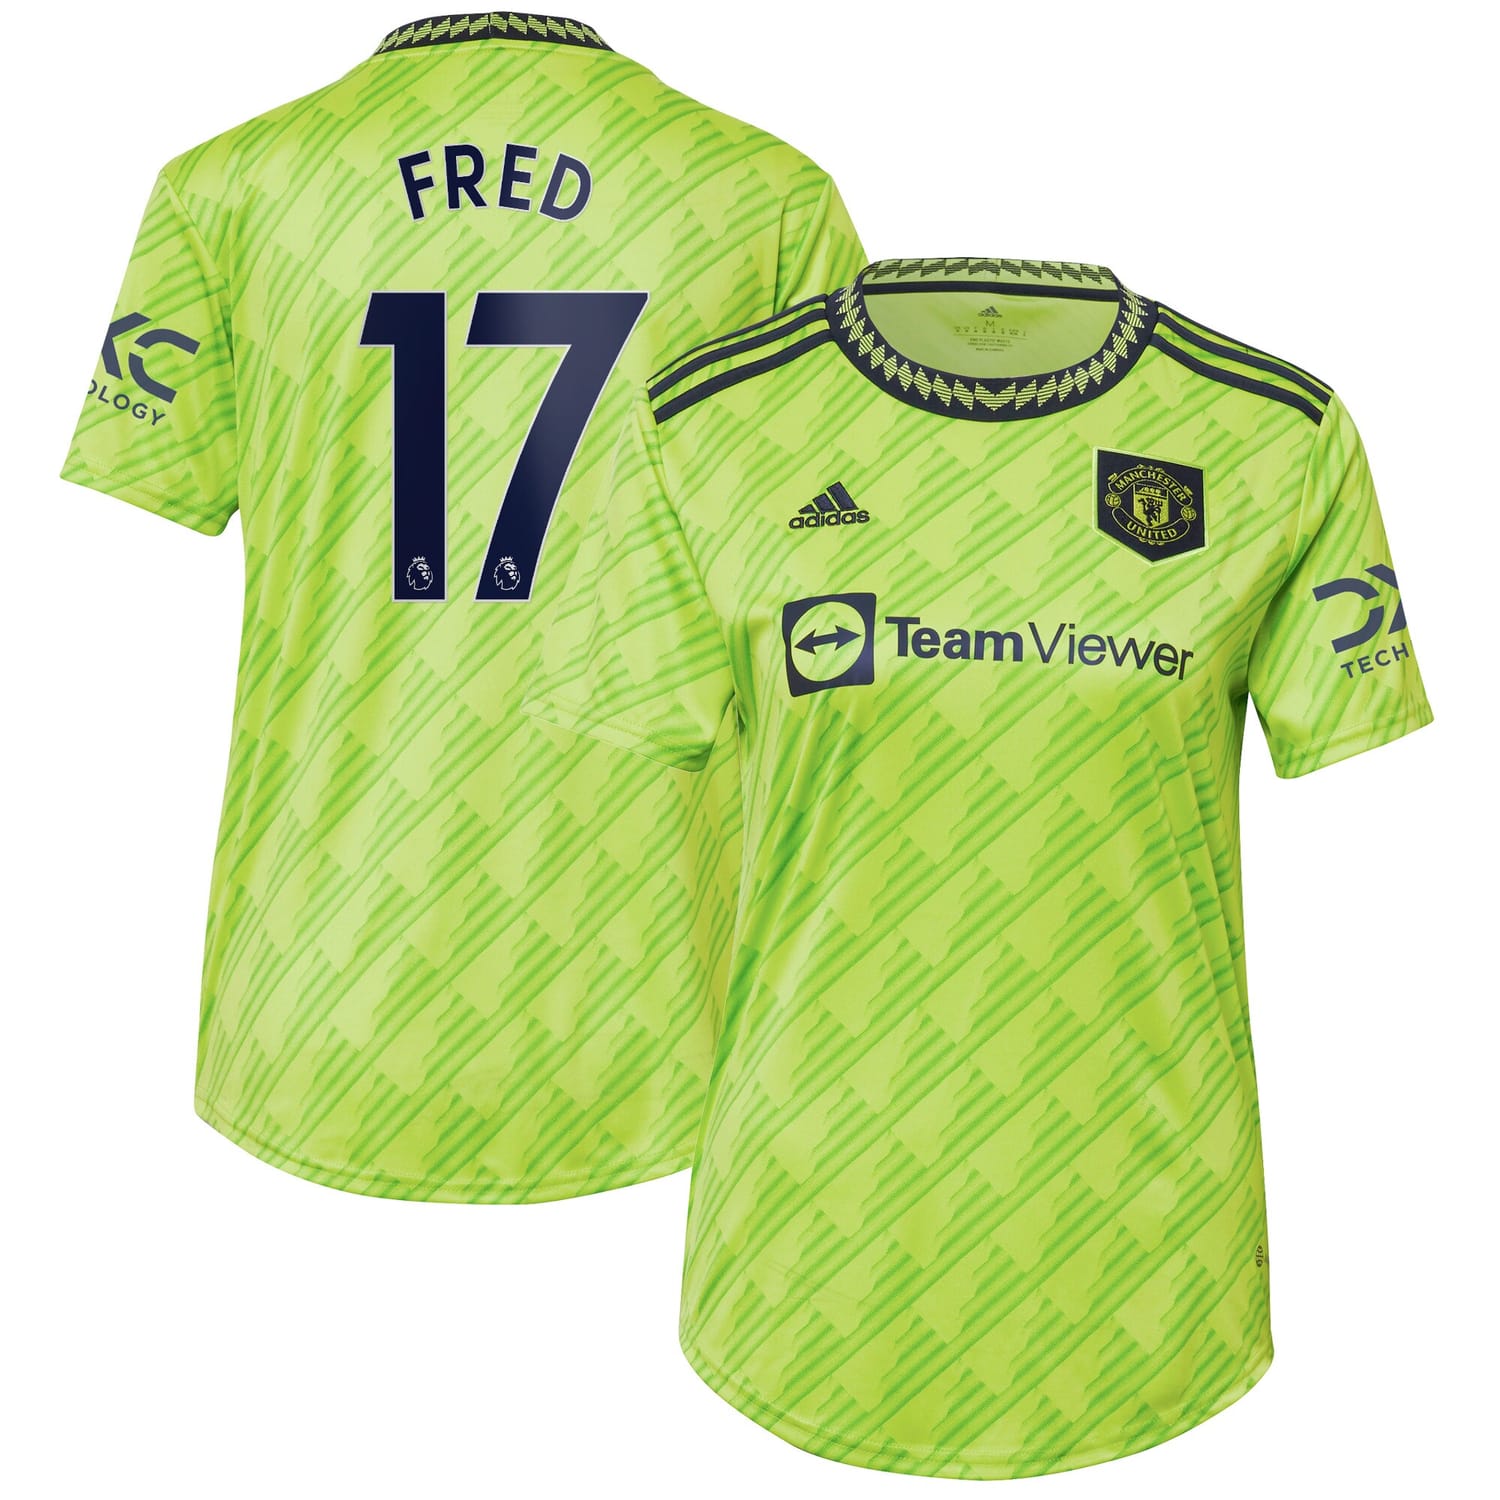 Premier League Manchester United Third Jersey Shirt Neon Green 2022-23 player Fred printing for Women